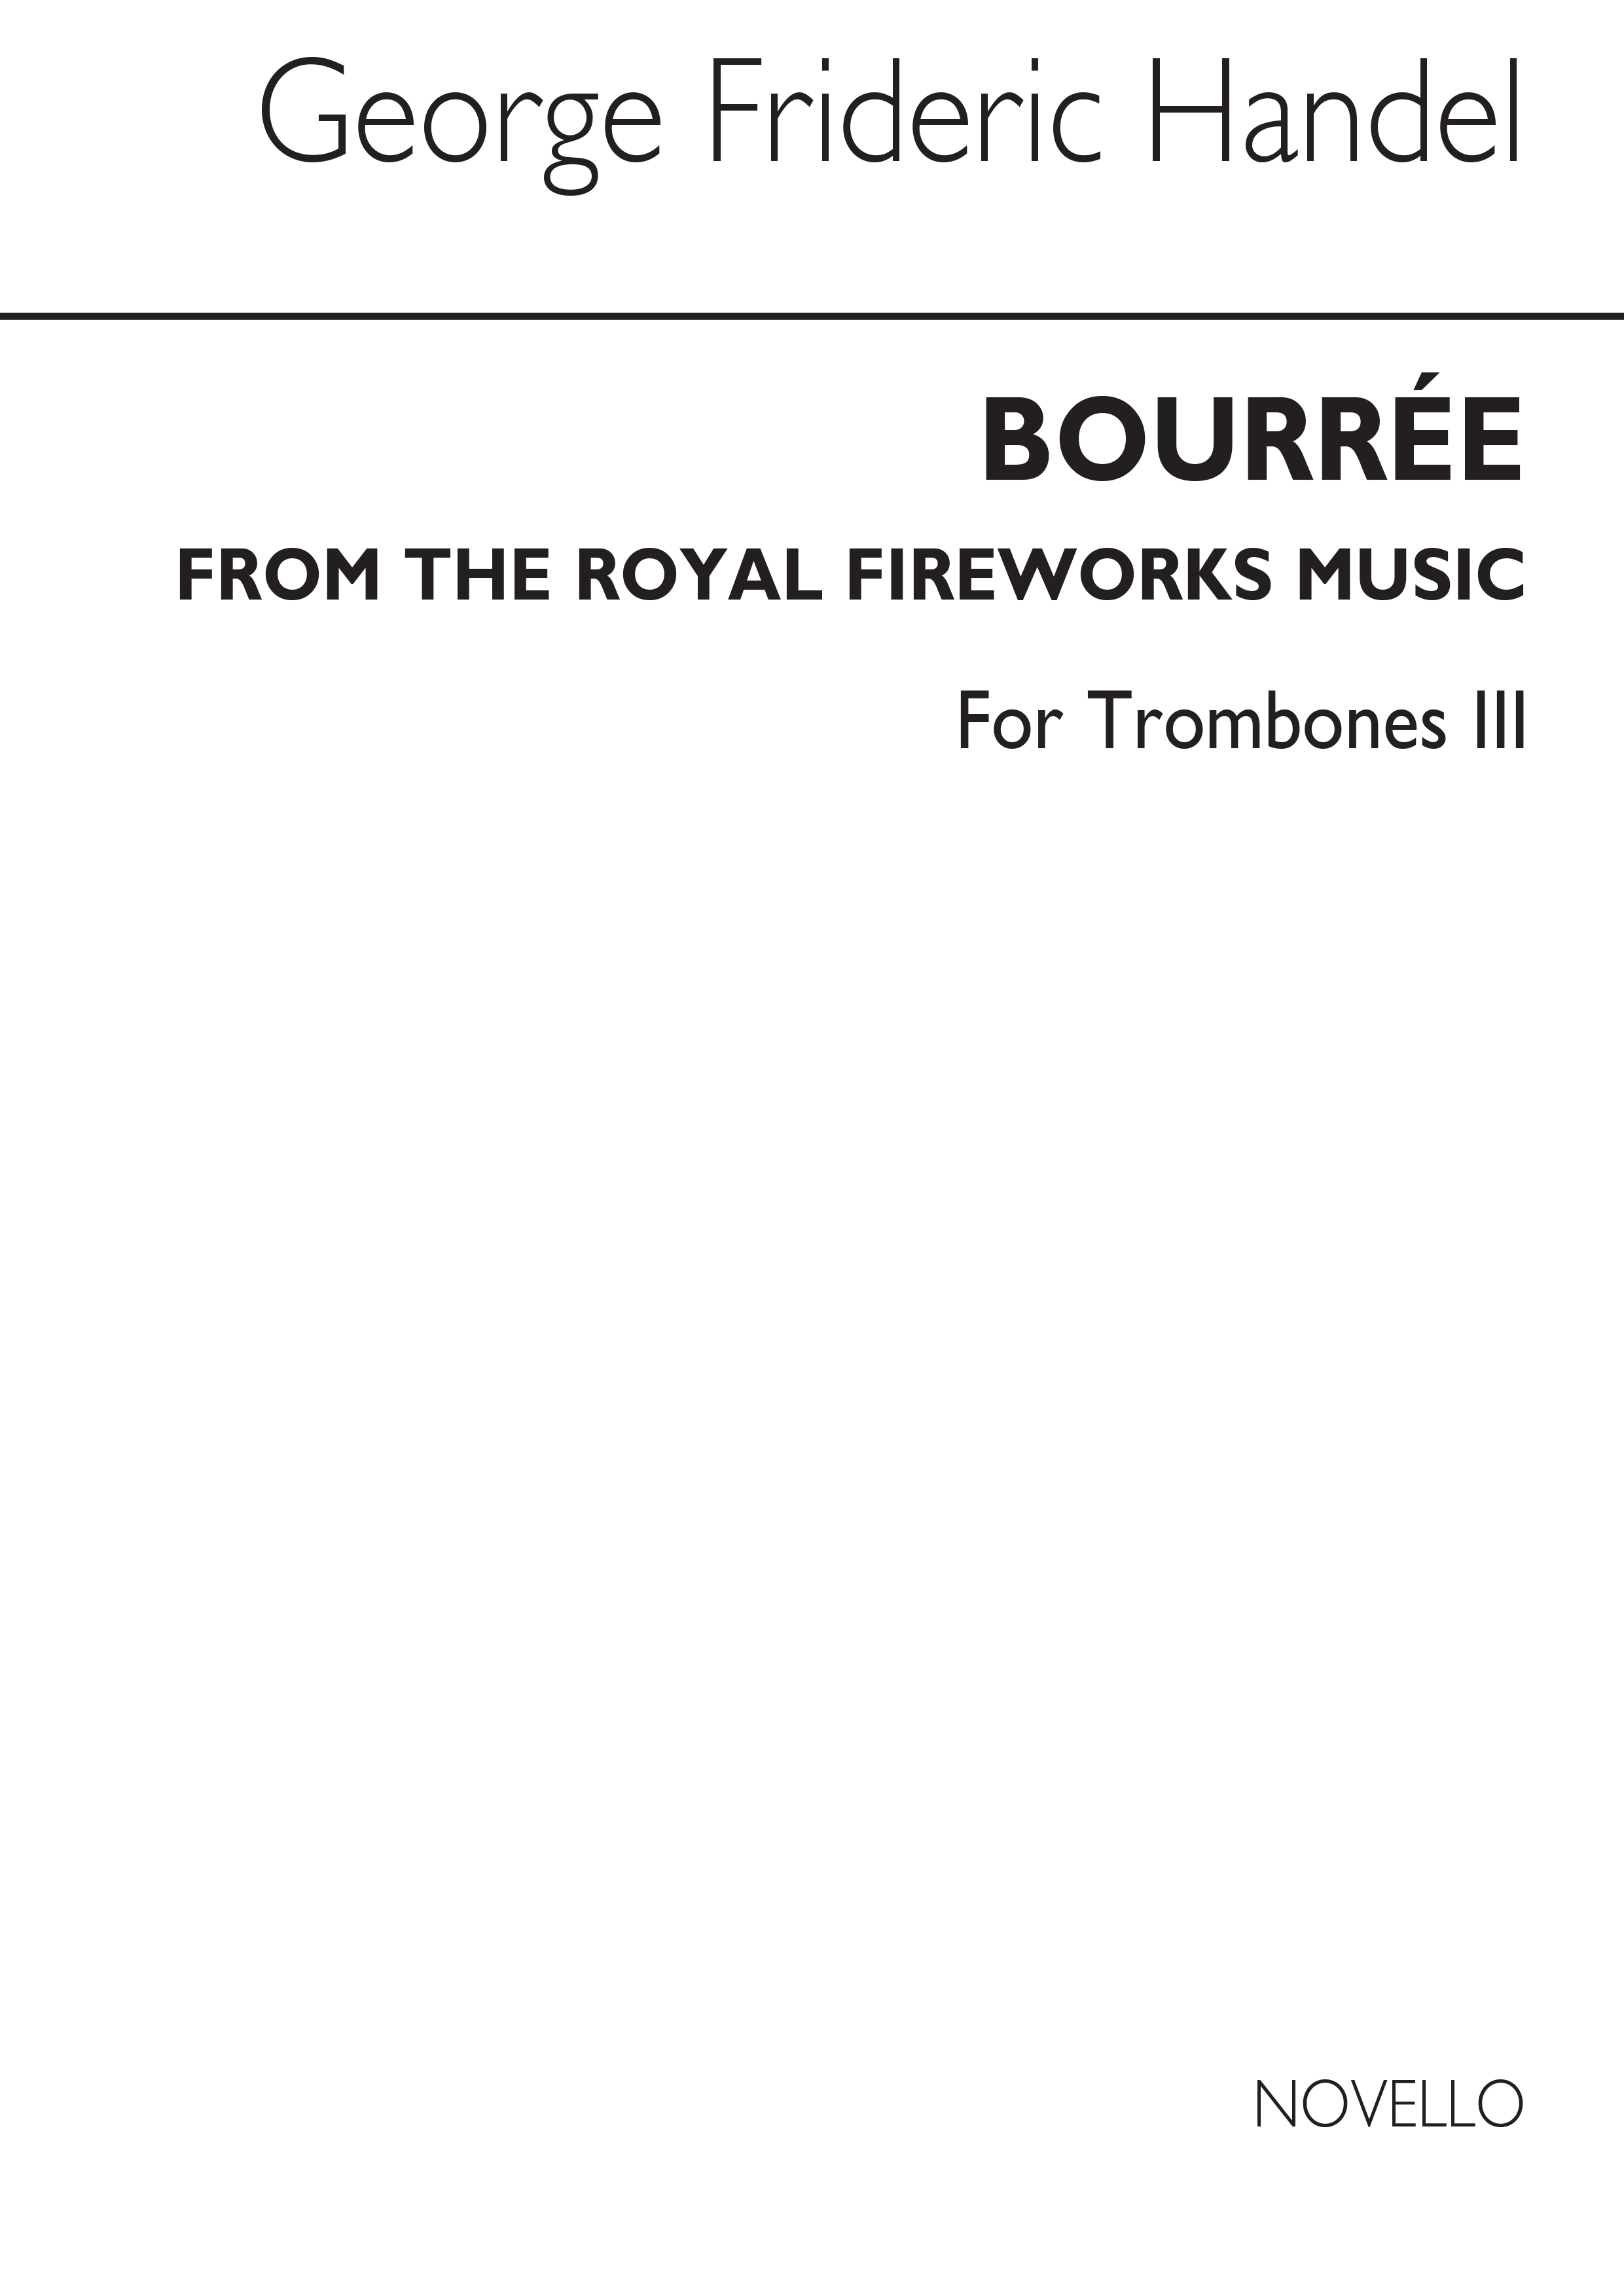 George Frideric Handel: Bourree From The Fireworks Music (Tc Tbn 3/Euph)